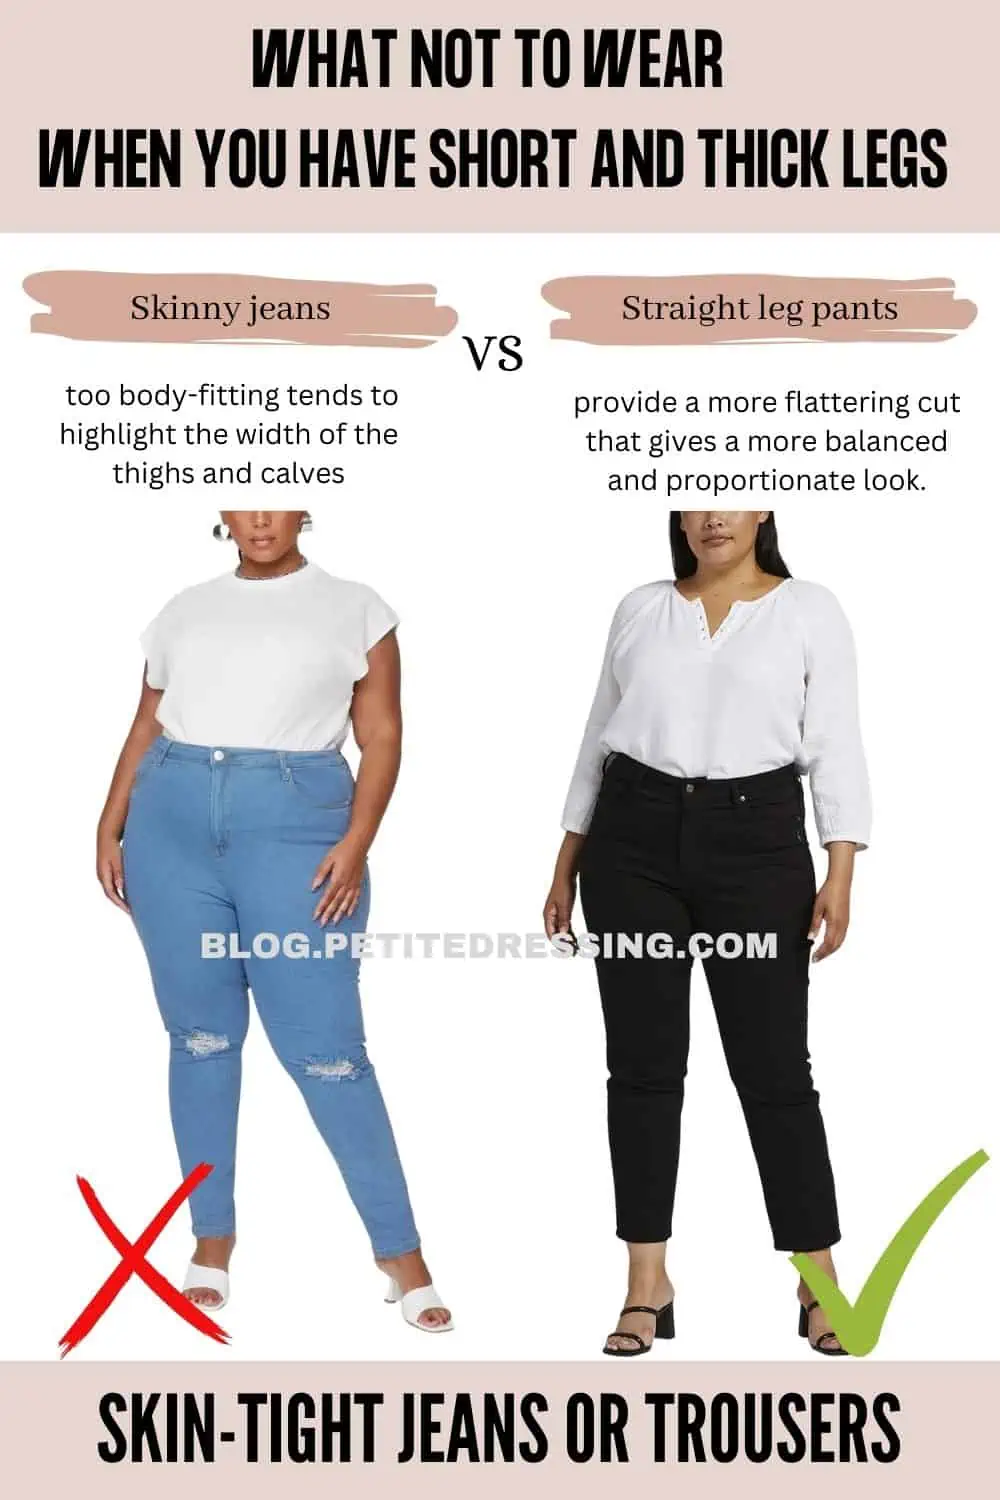 4 Really Cool Ways to Make Jeans Bigger  Upsize Jeans  YouTube